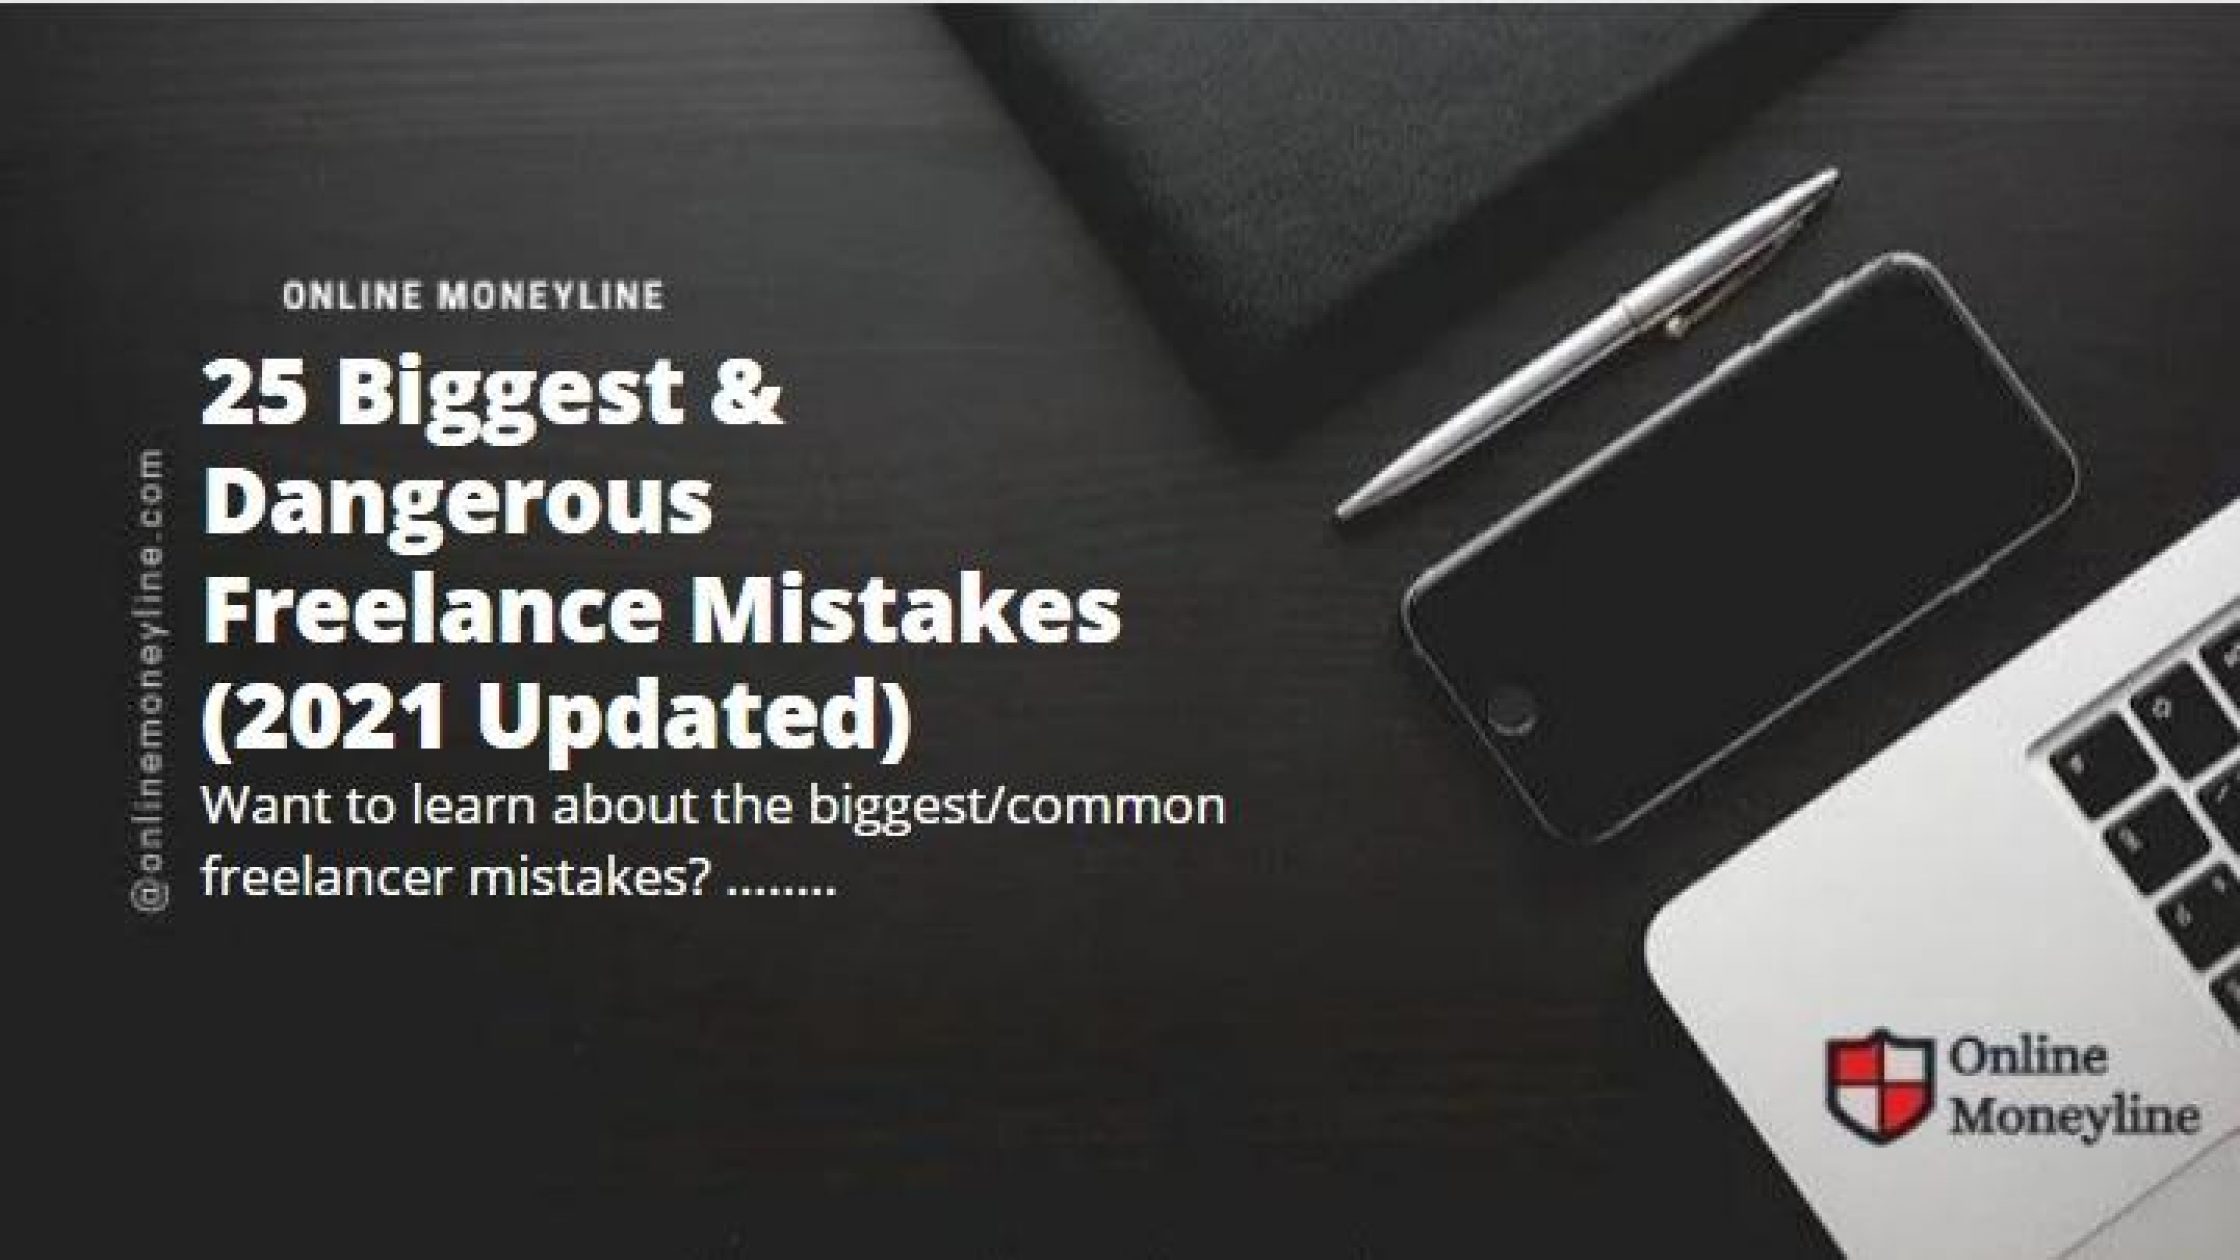 25 Biggest & Dangerous Freelance Mistakes (2021 Updated)